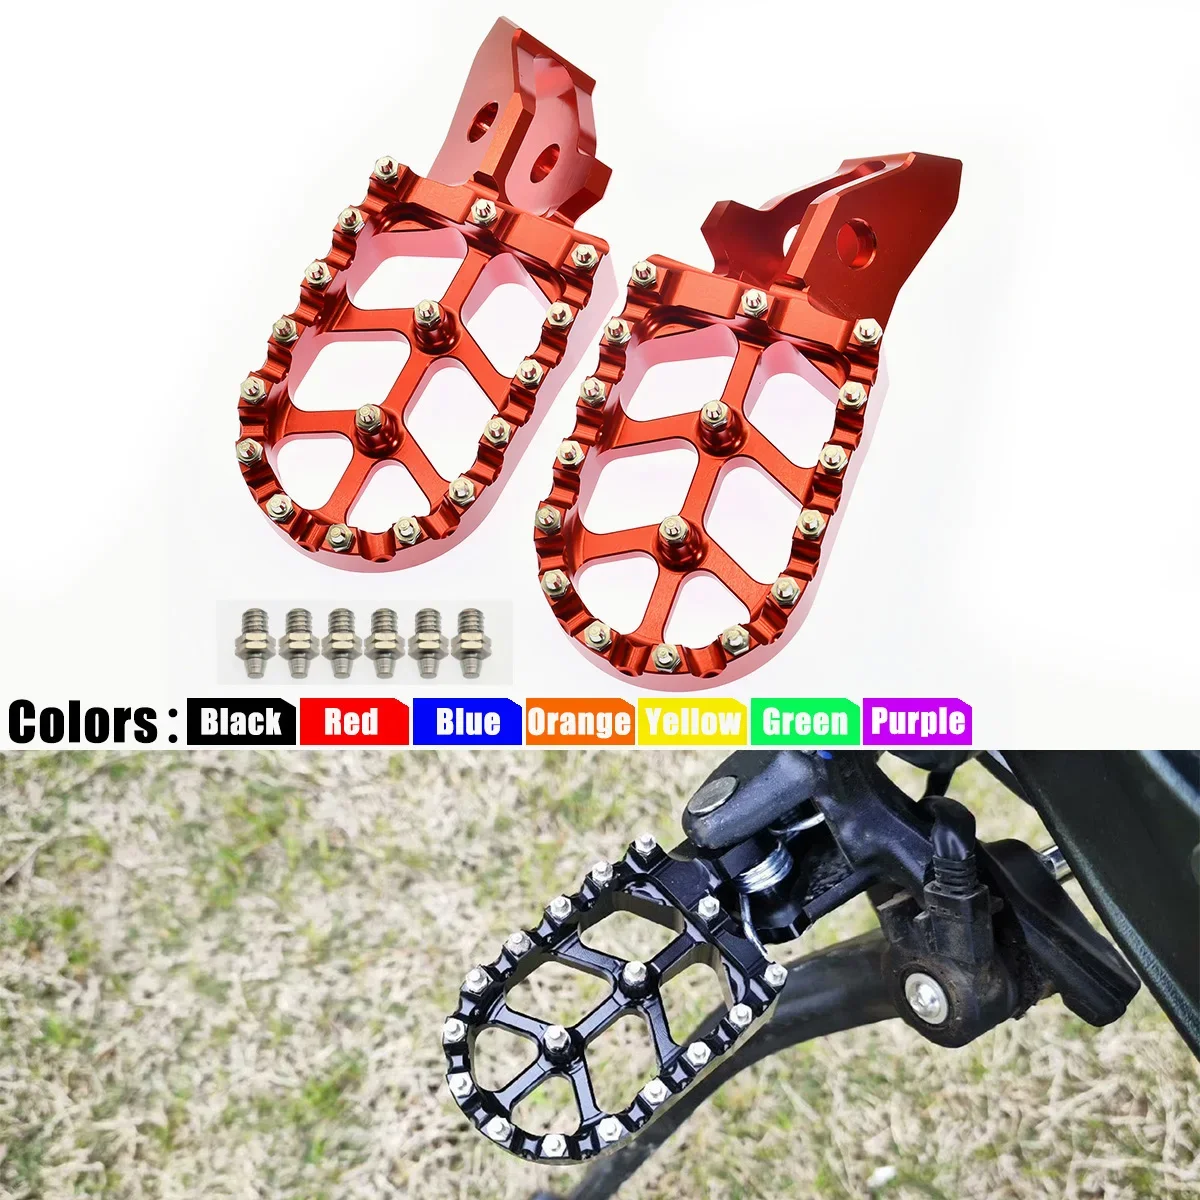 Bike Footrest Footpegs Foot Pegs Rests Pedal For Sur-Ron Surron UltraBee - $46.41